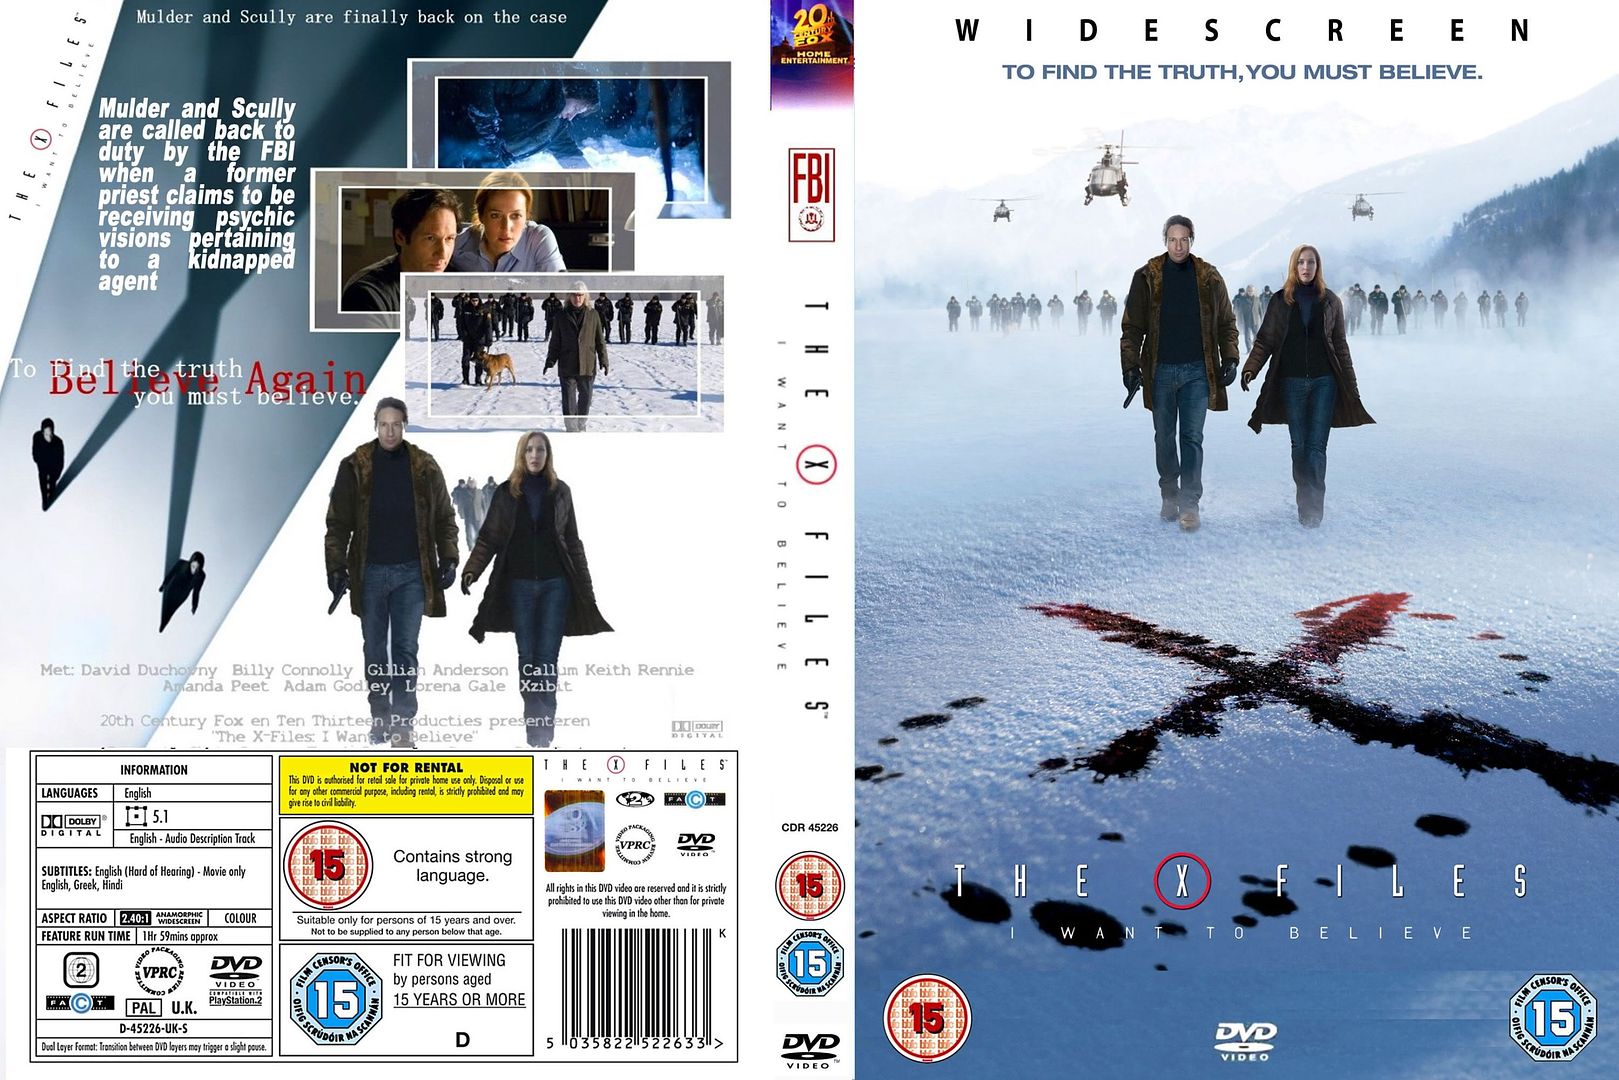 http://i259.photobucket.com/albums/hh294/mmfore/Movie%20Posters/The_X_Files_I_Want_To_Believe_Ws_R2.jpg?t=1226955196